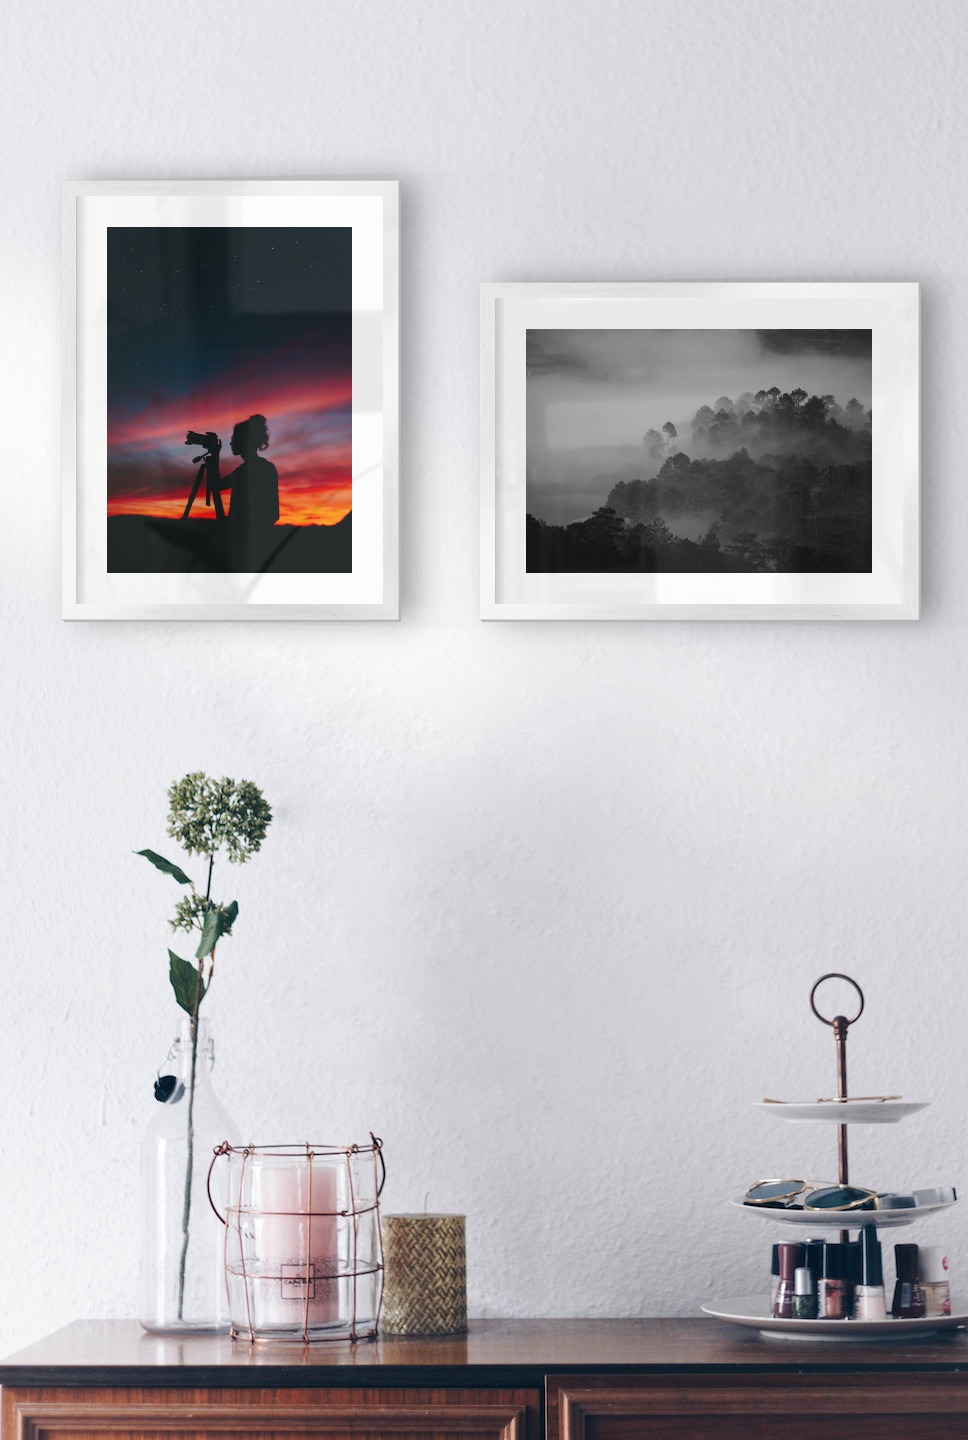 Gallery wall with picture frames in silver in sizes 30x40 with prints "Photographer at night" and "Foggy wooden tops"